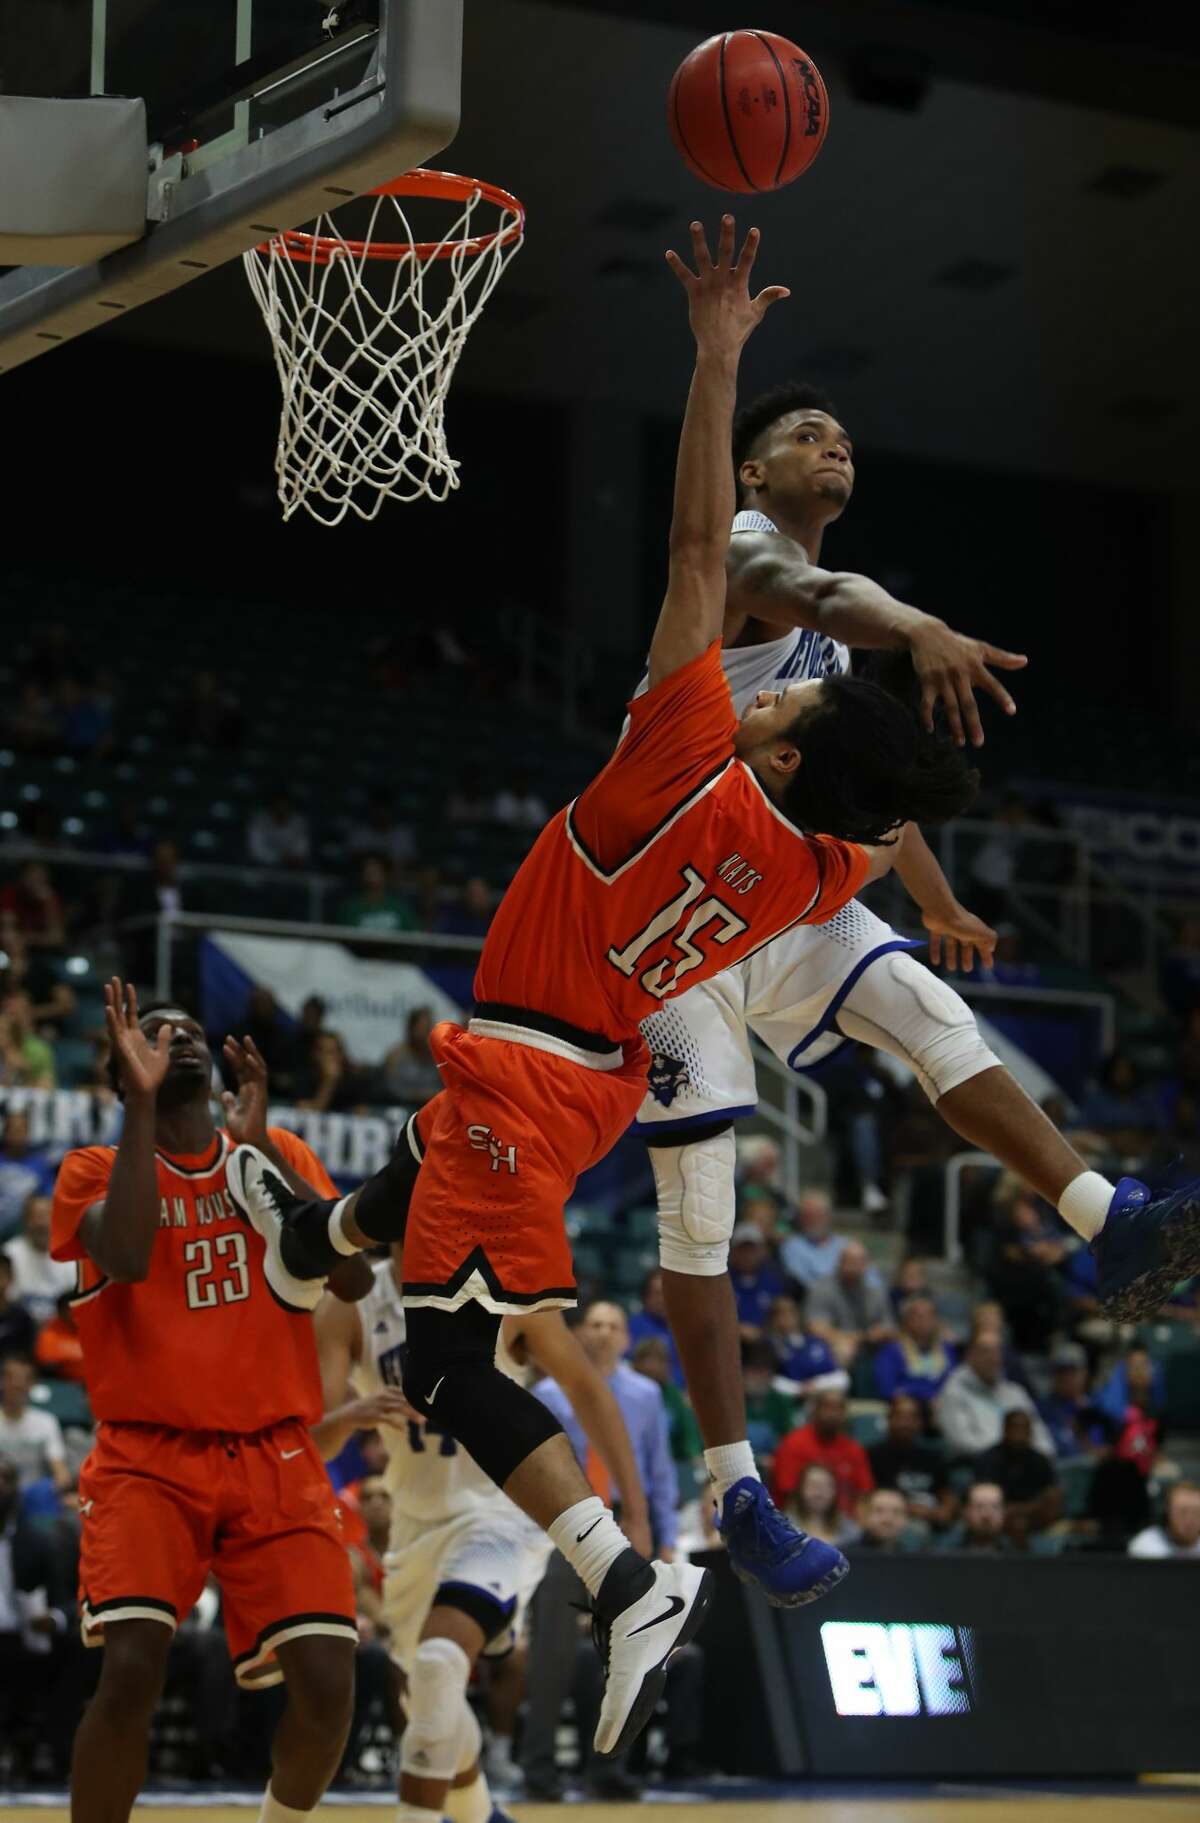 Sam Houston State guard Josh Delaney (15) gets off a shot under pressure by New Orleans forward Travin Thibodeaux (25) during second-half action in The Southland Conference Basketball Tournament in the Leonard E. Merrell Center Friday, March 10, 2017, in Katy. ( Steve Gonzales / Houston Chronicle )